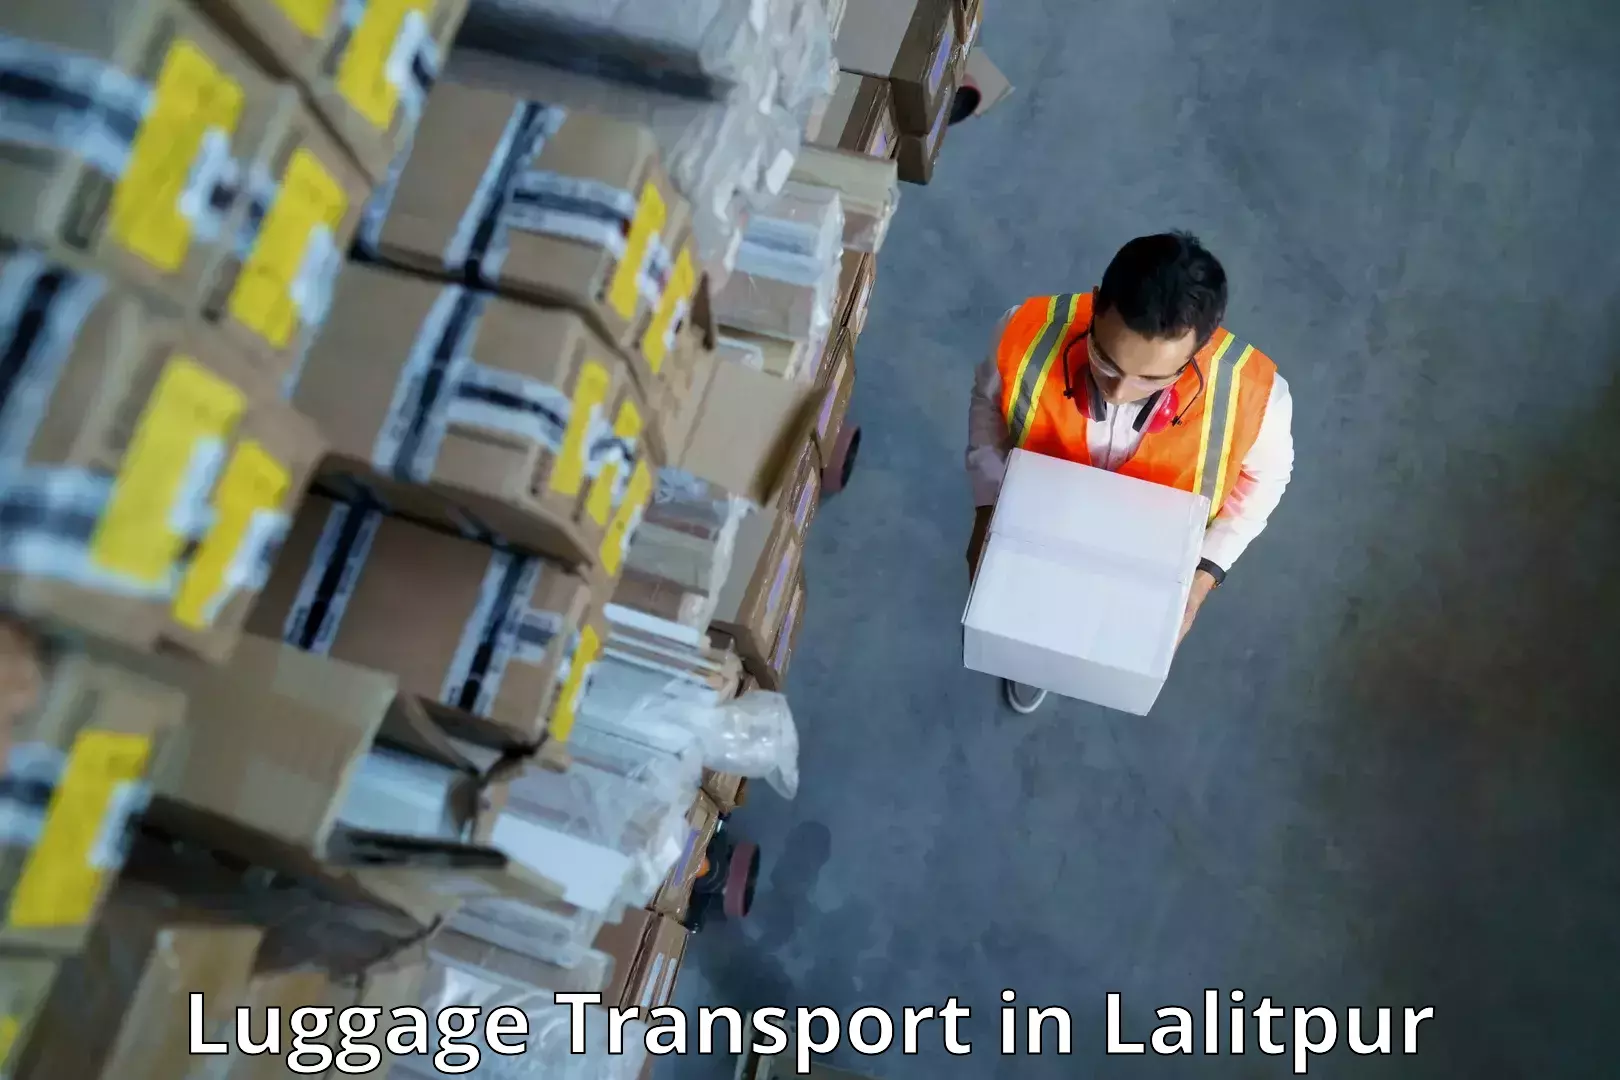 Luggage transport consulting in Lalitpur